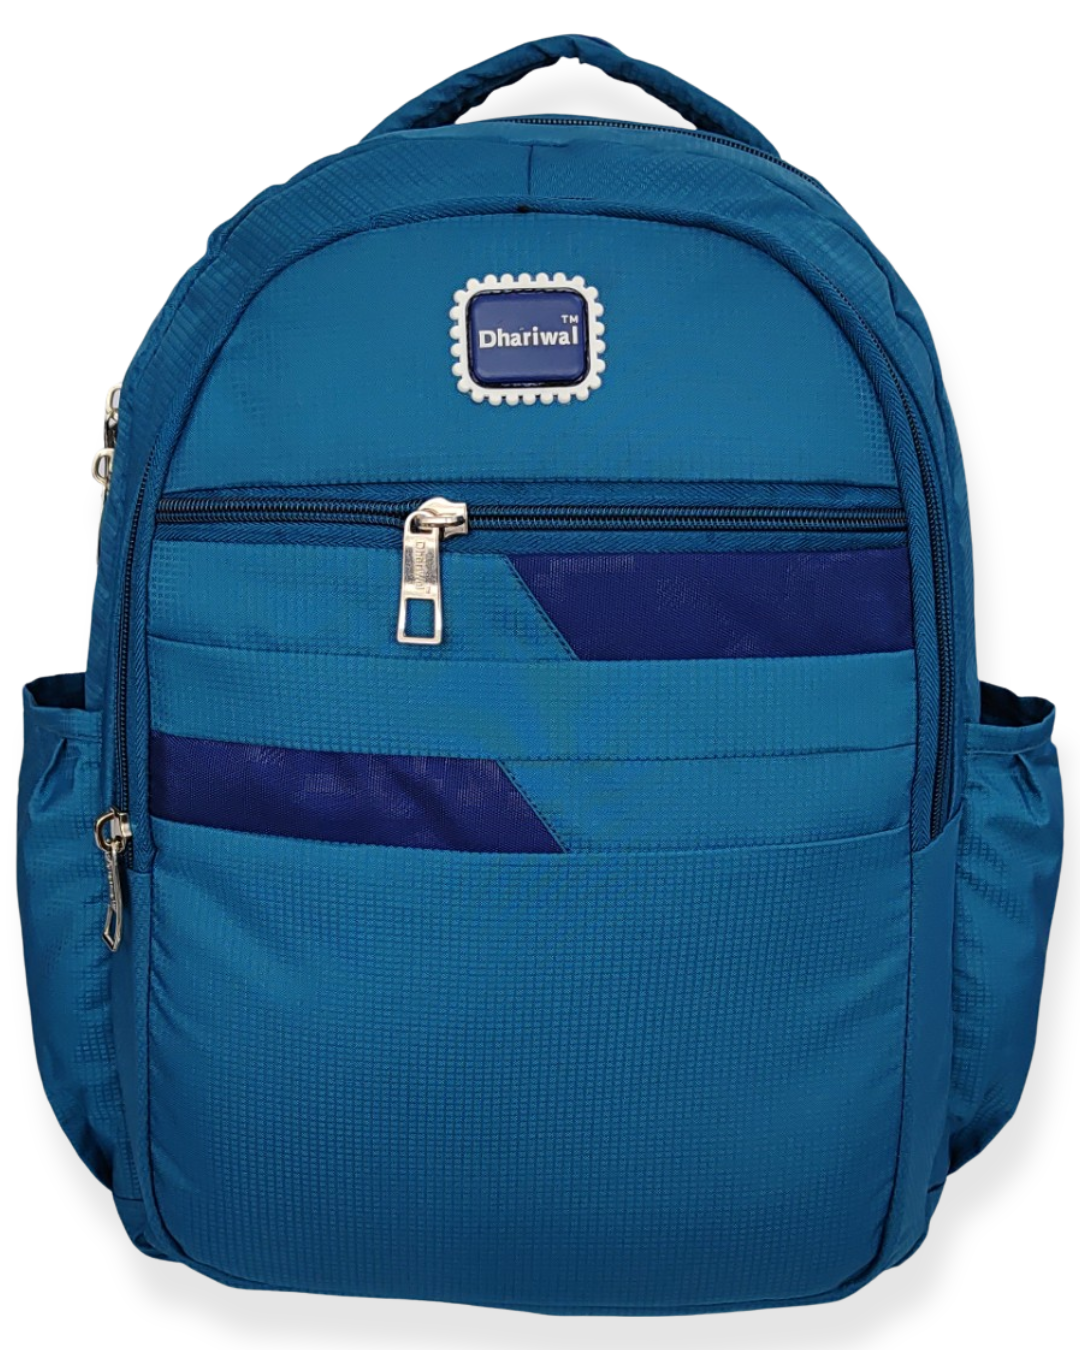 Dhariwal Unisex Dual Compartment 34L Backpack BP-225